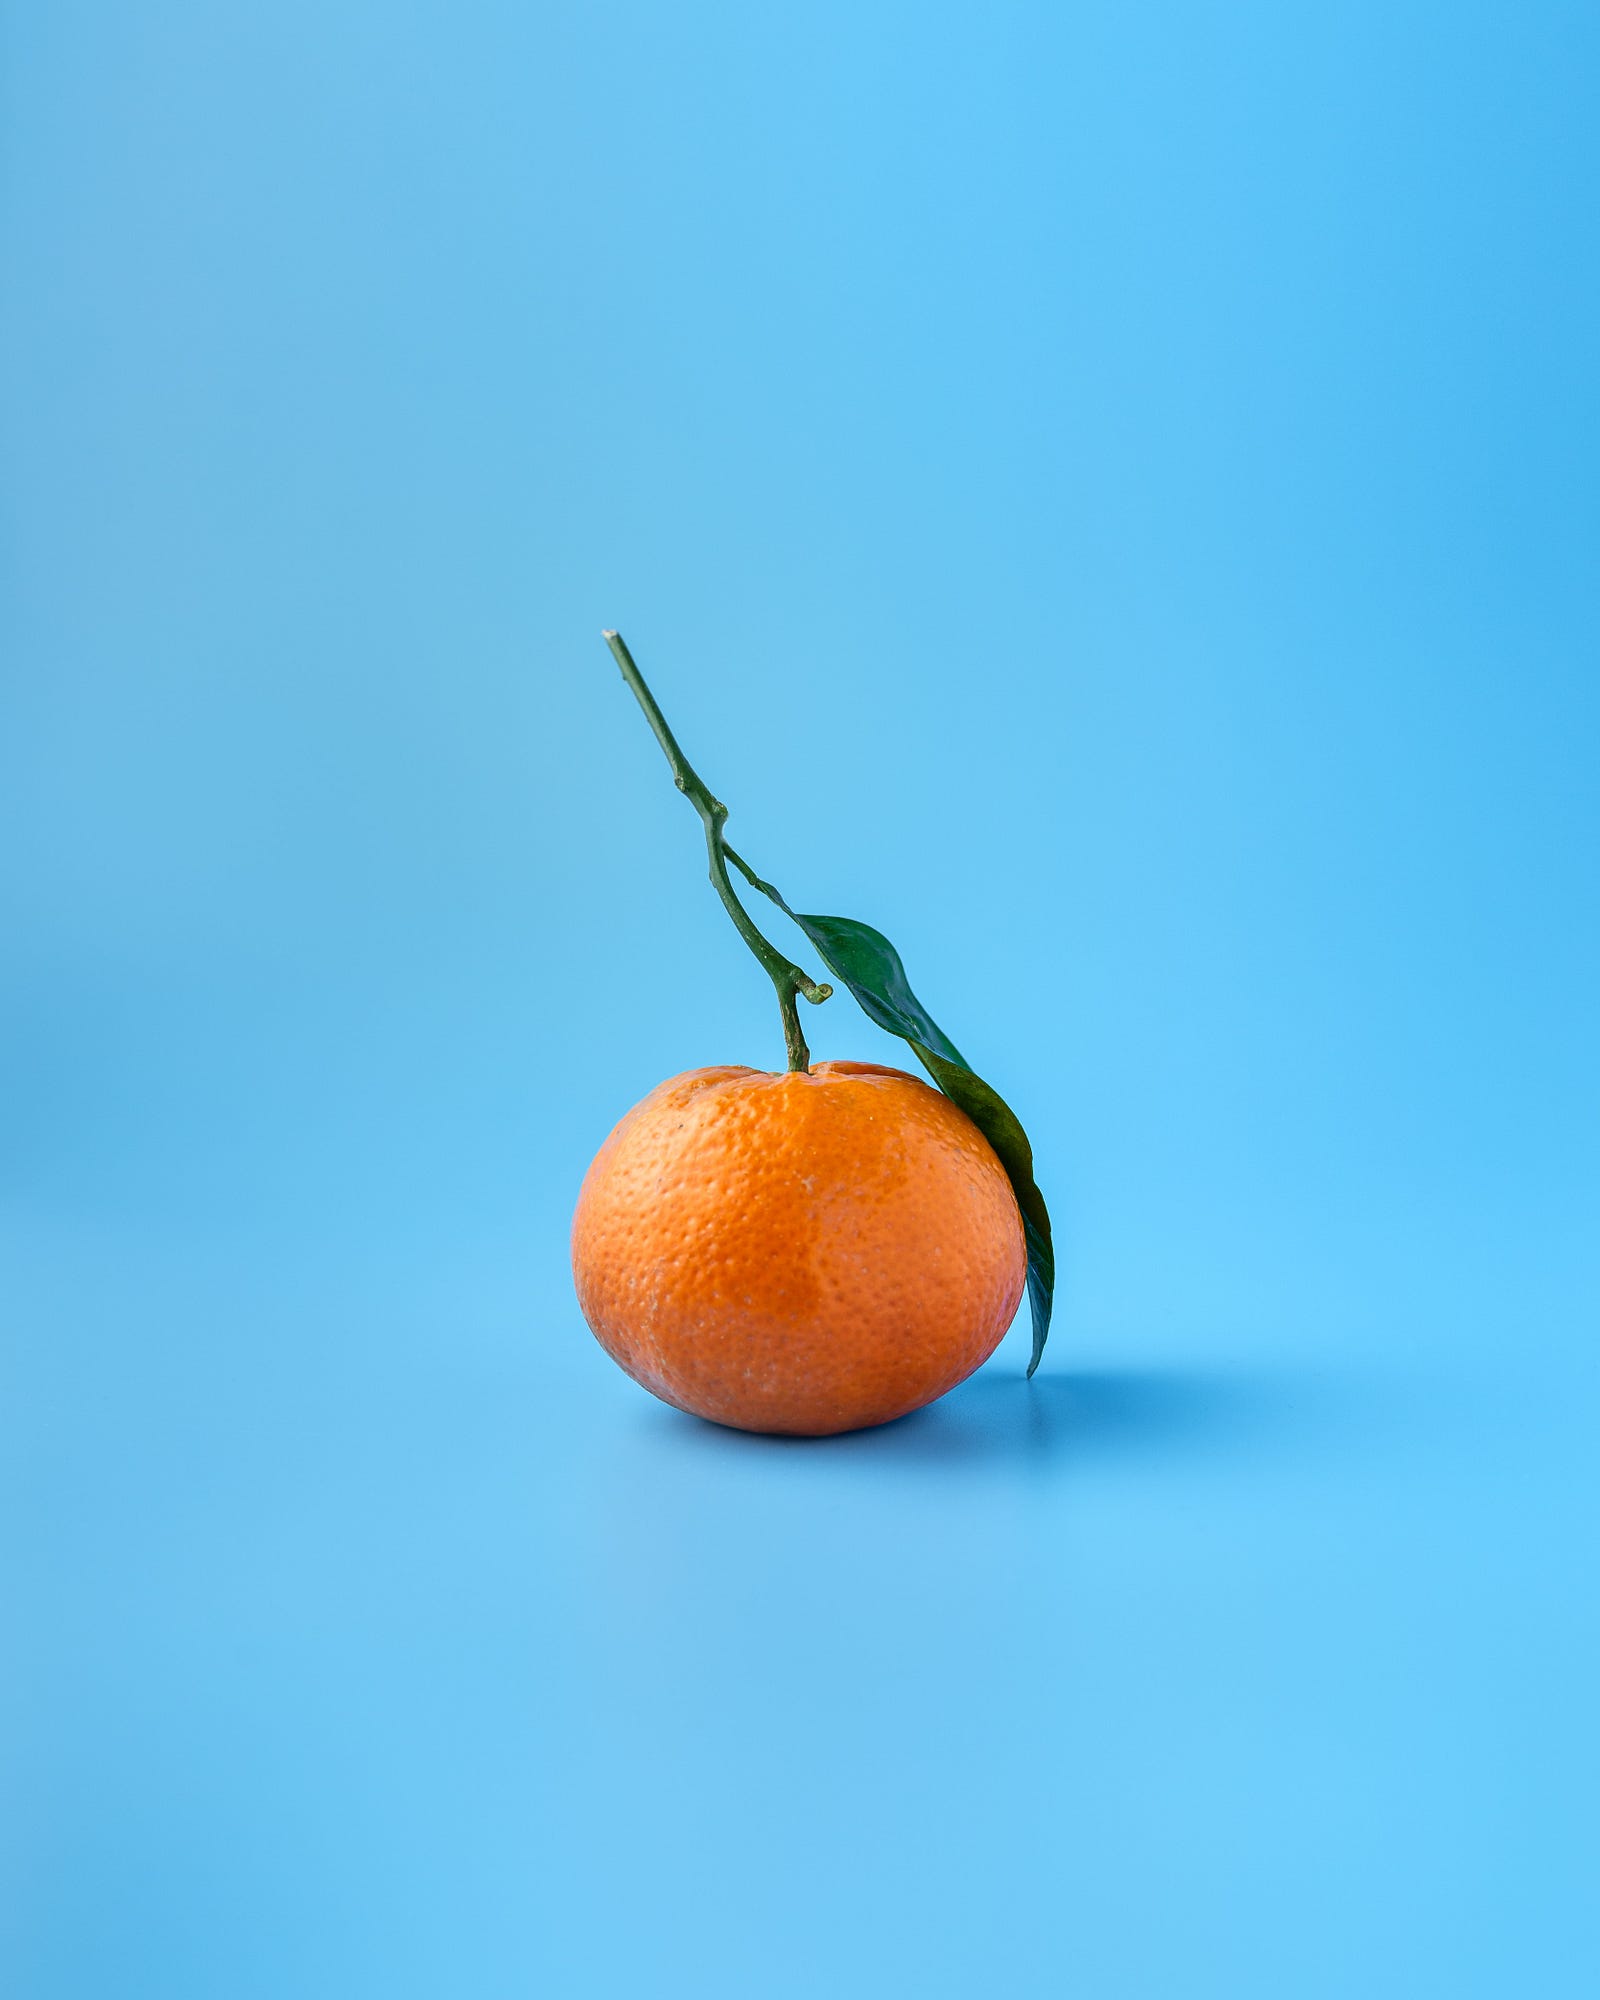 A single tangerine (with a long stem) set against a light blue background. The vitamin C content of tangerines may promote collagen synthesis. This synthesis can reduce aging signs and improve wound healing.